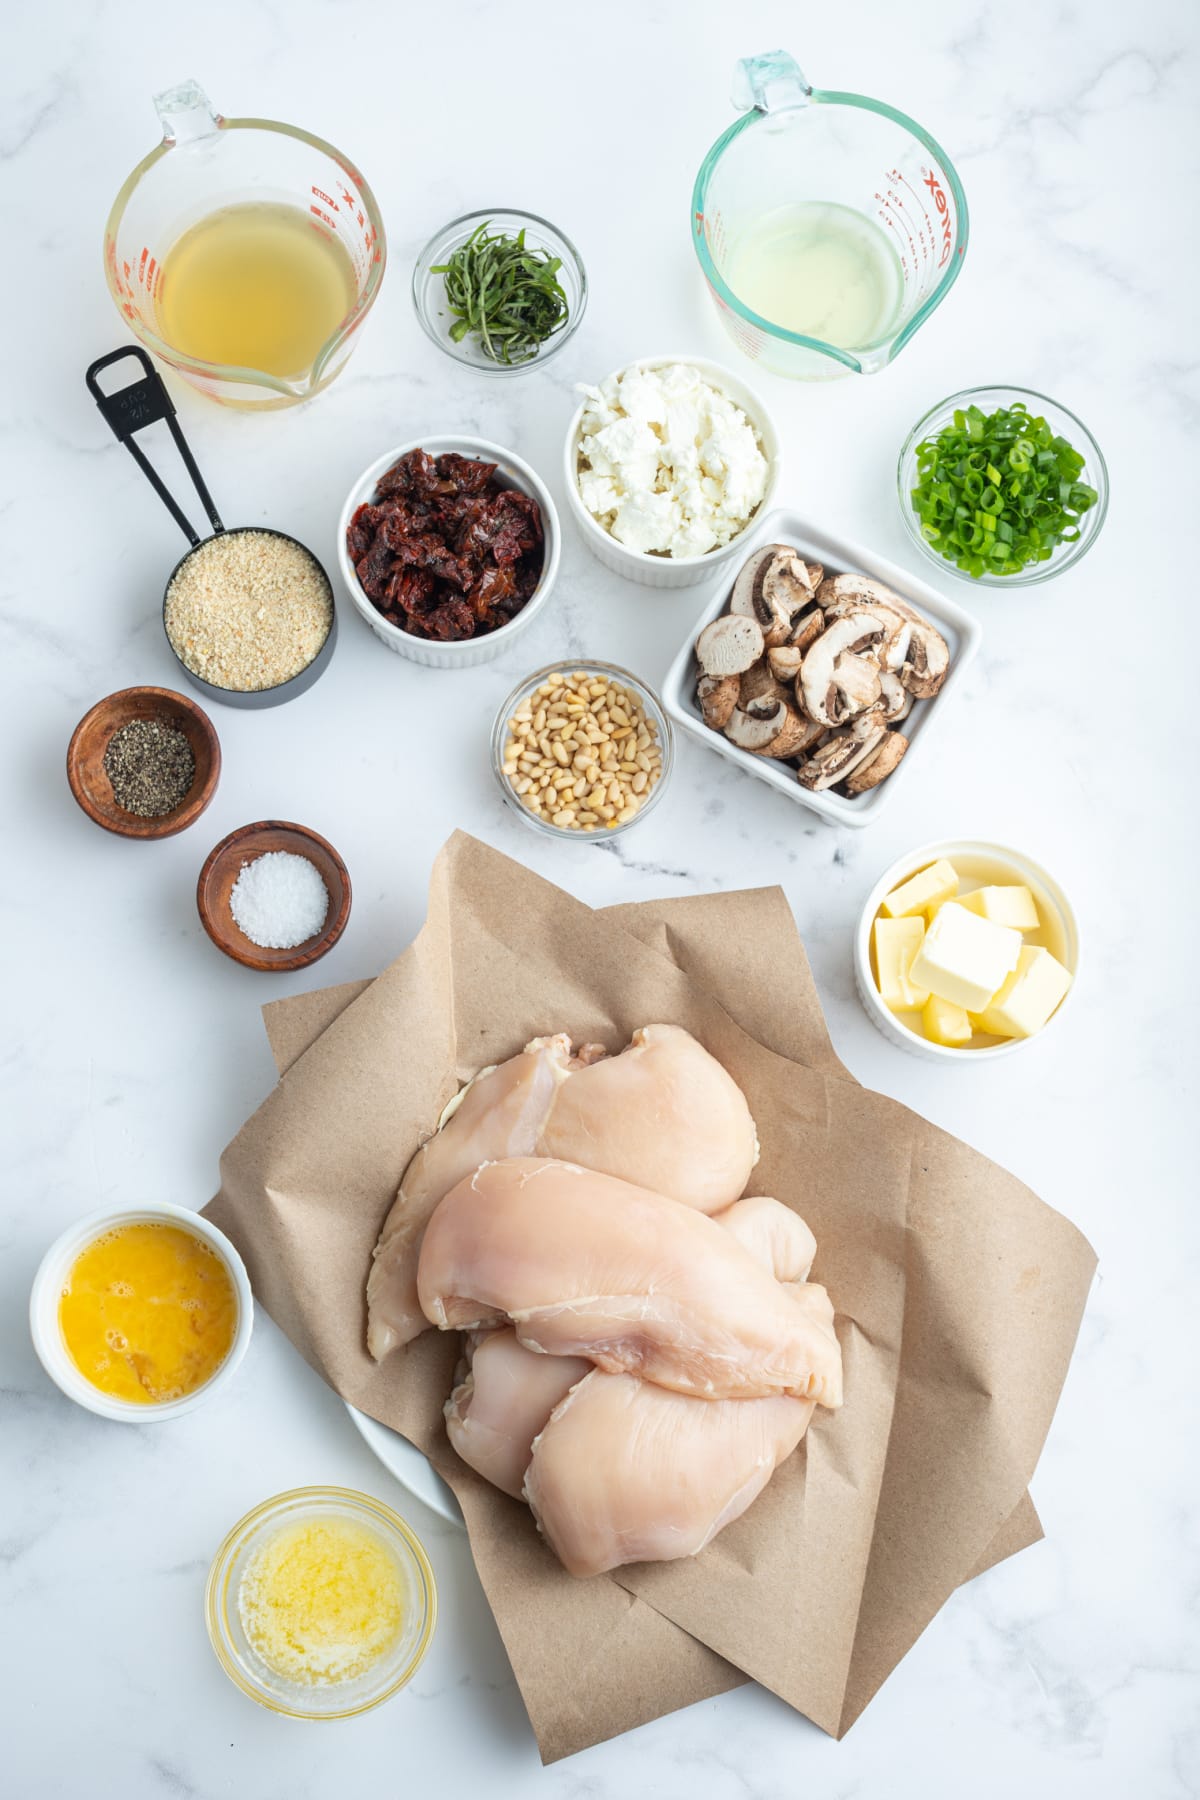 ingredients displayed for making chicken breasts stuffed with goat cheese and sun-dried tomatoes